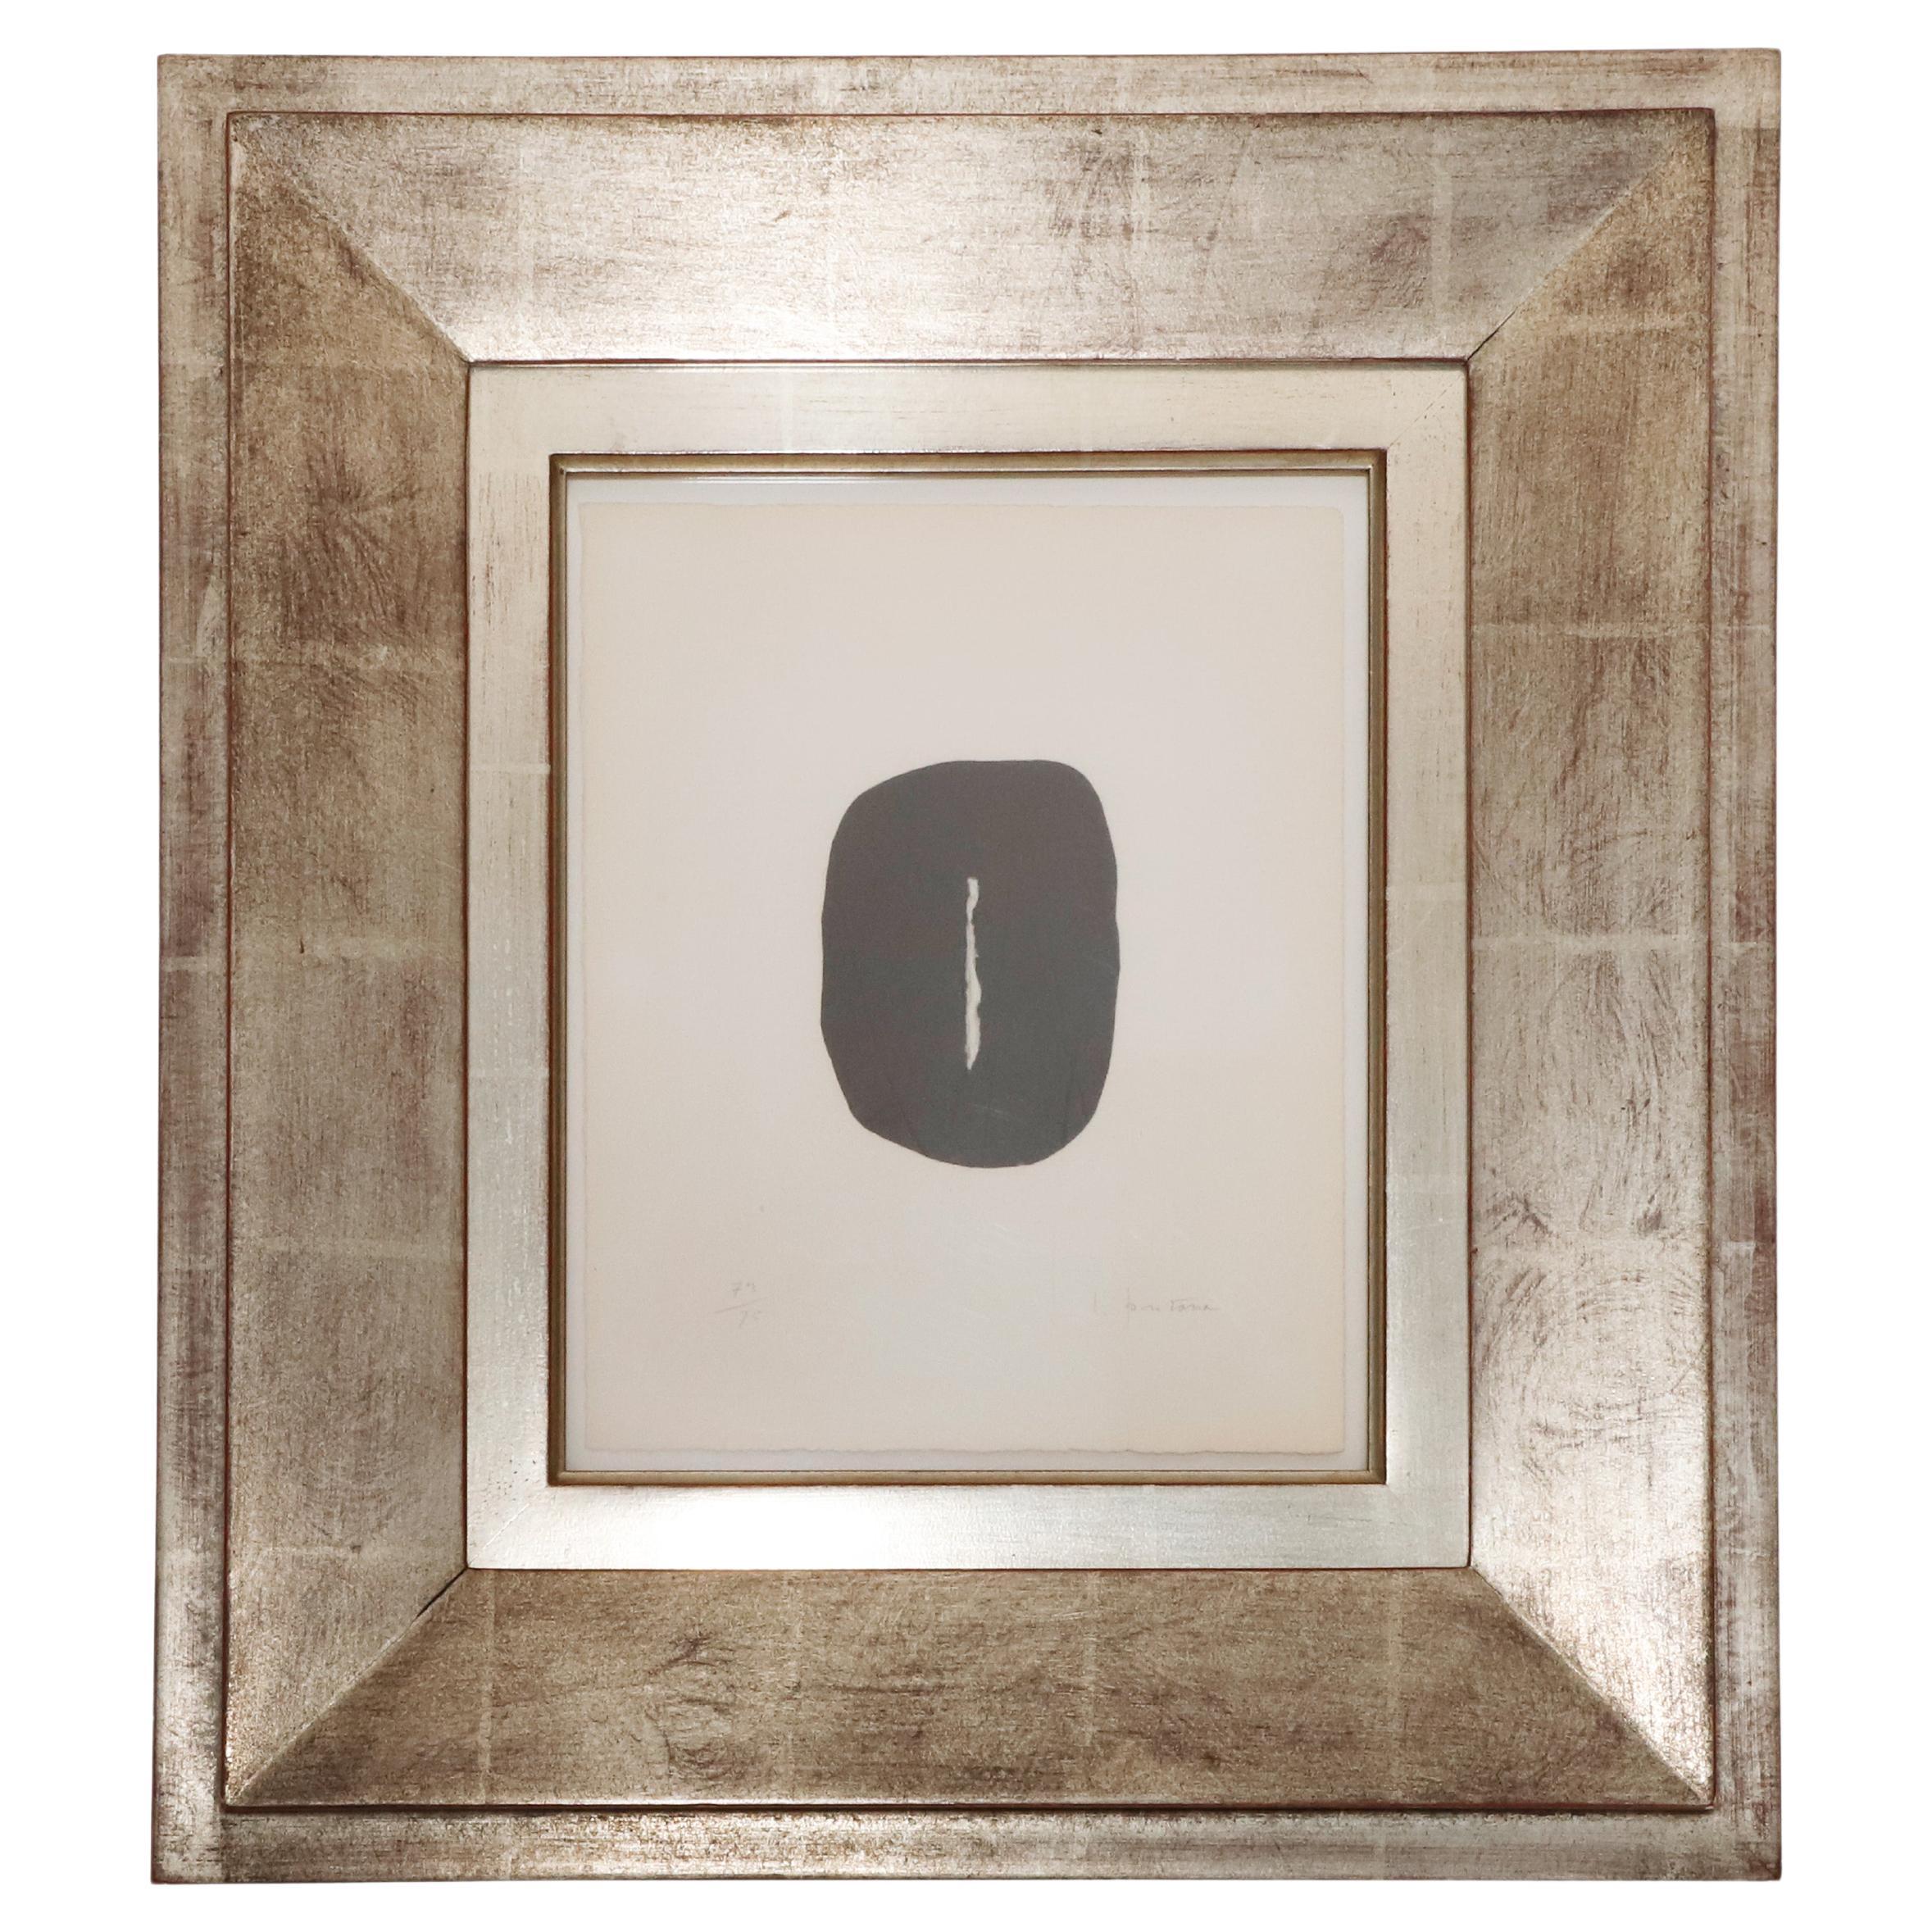 Lucio Fontana Print Titled "Utan Titel" on Frame, Signed and Numbered